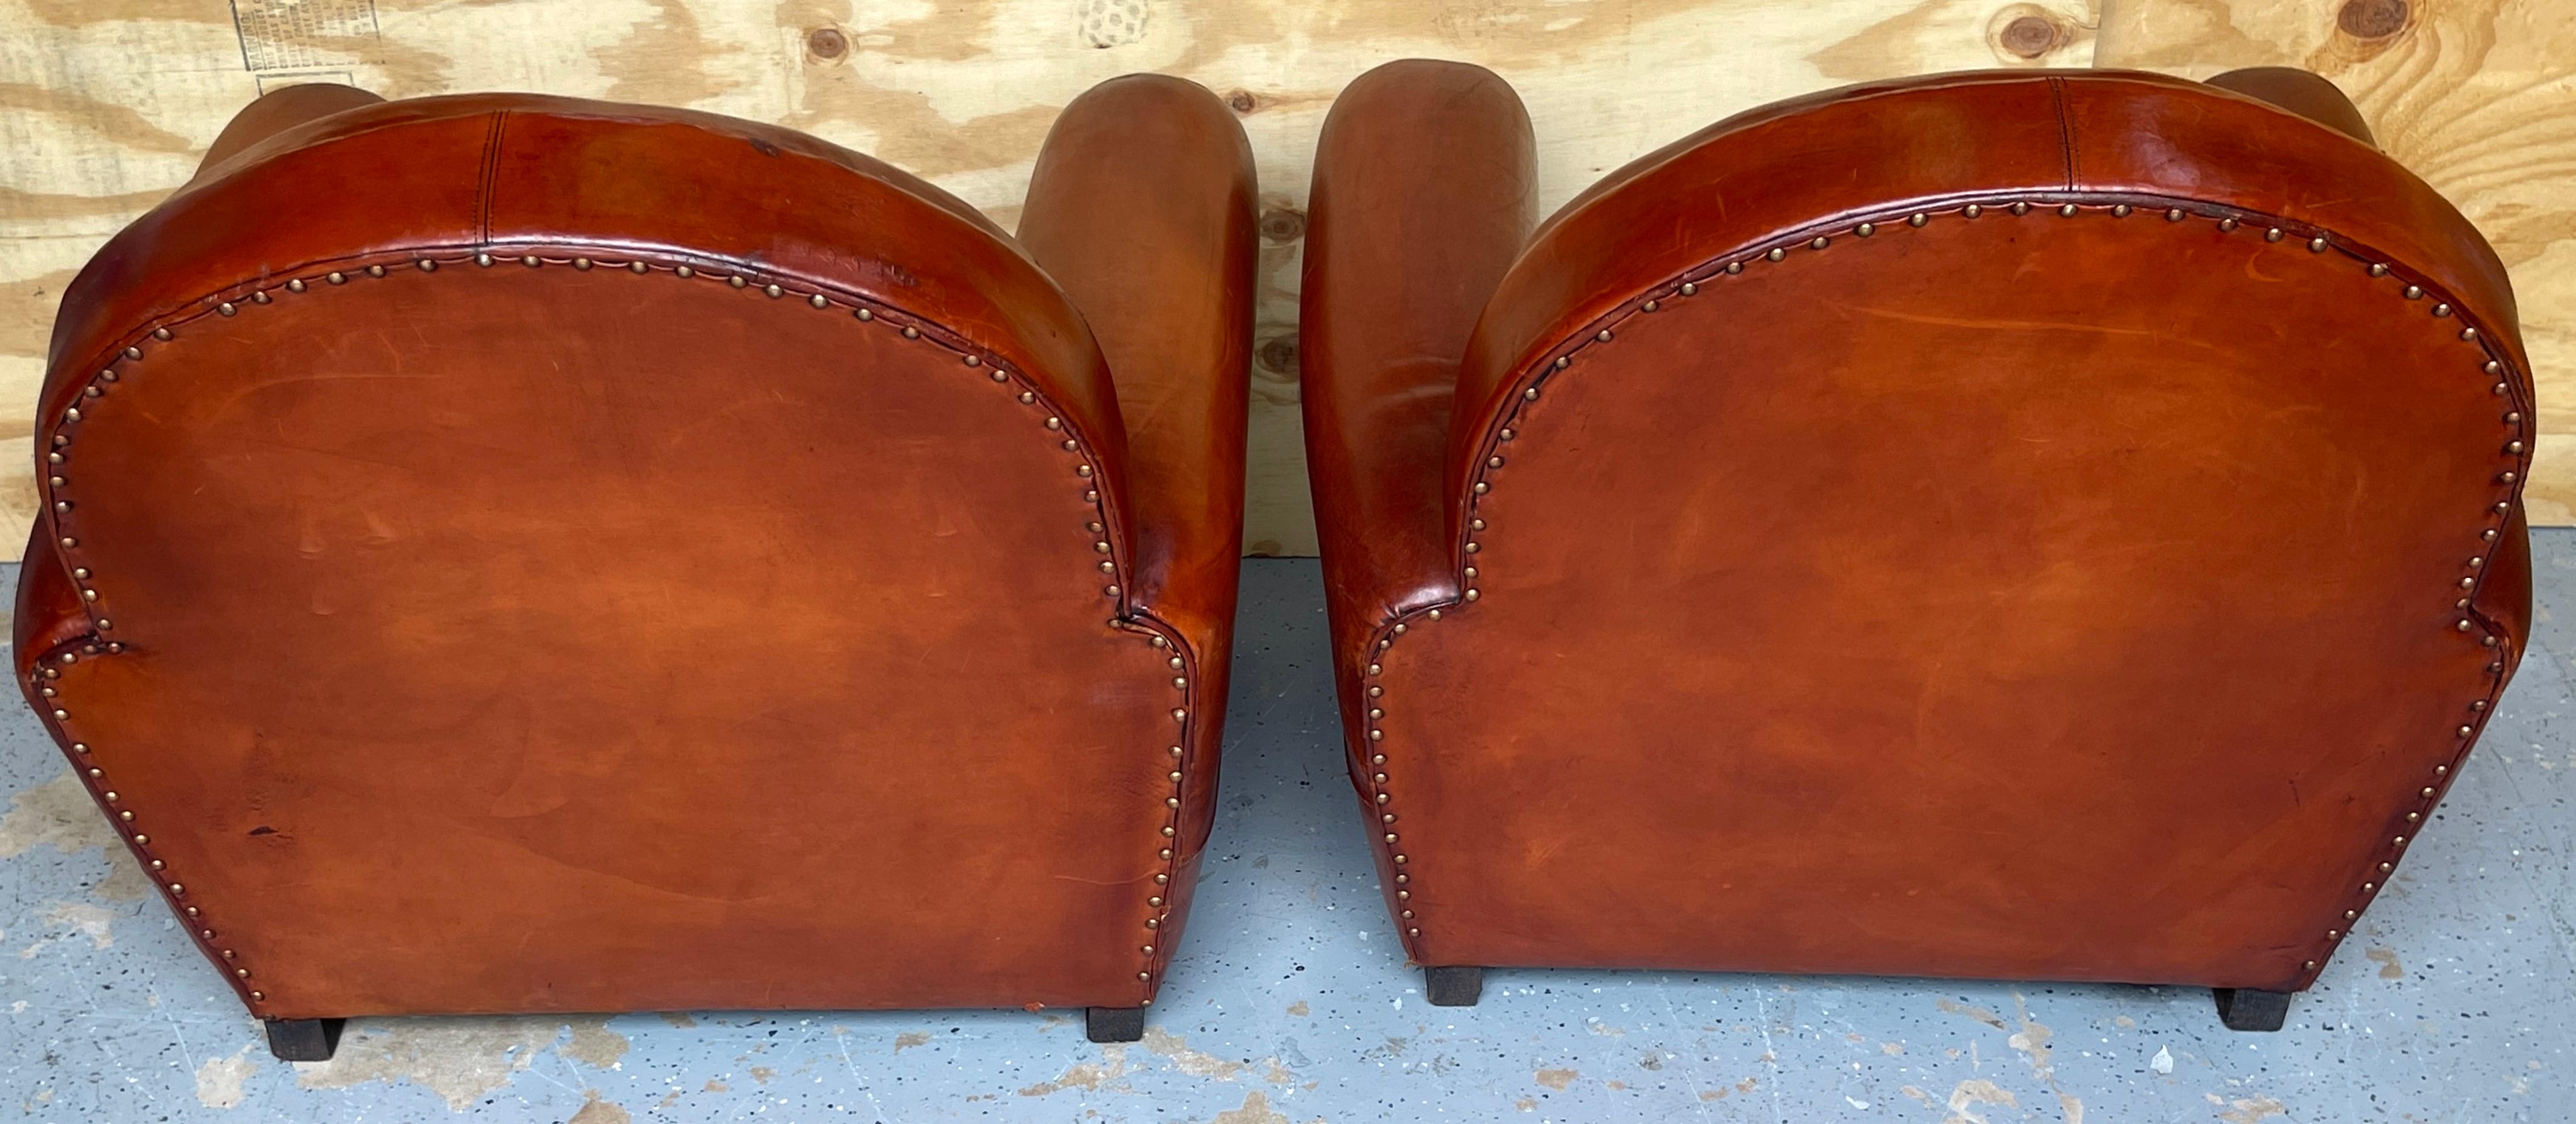 Pair of French Art Deco Saddle Leather Chairs For Sale 3